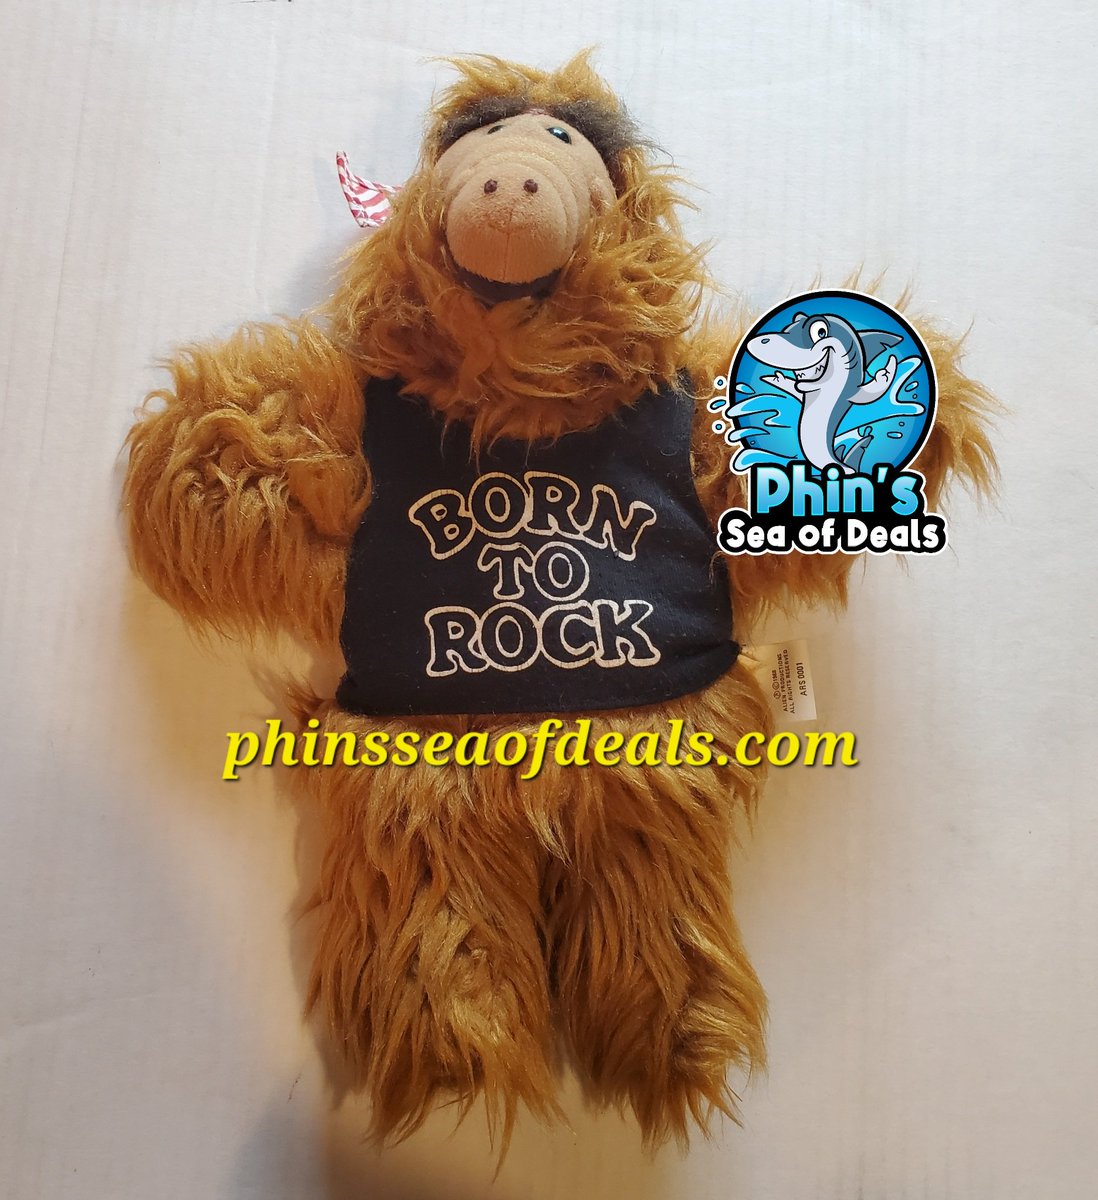 Vintage 1988 Alf hand puppet with a Born to rock shirt and a bandana 

Phinsseaofdeals.com 

#alf #alfdoll #80stoys #80sshows #80scartoons #80s #puppet #alfpuppet #washingtoncountypa #washingtonpa #mcmurraypa #vintageplush #vintage #vintagecollector #Phinsseaofdeals #80stv